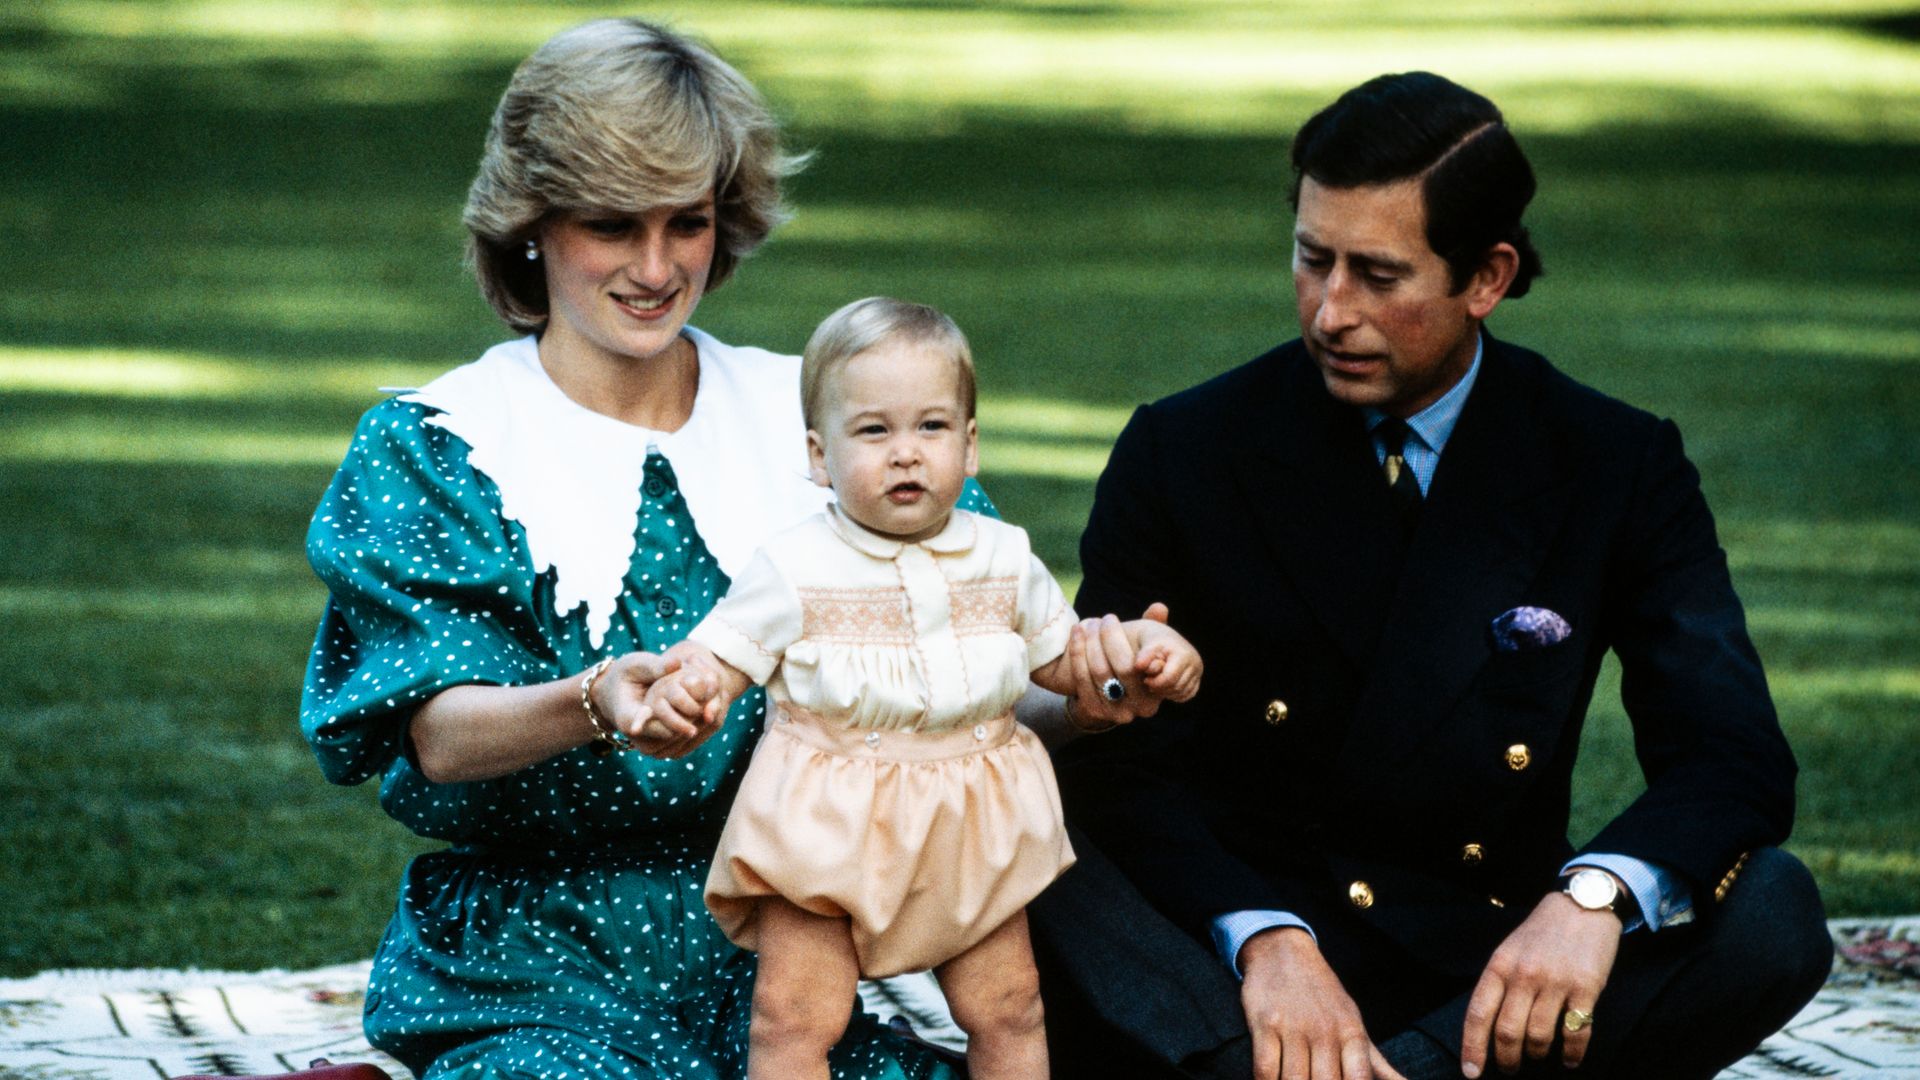 Diana Princess of Wales with Prince Charles and Prince William posing for a photocall on the lawn of Government House in Auckland, New Zealand, on April 23, 1983 during the Royal Tour of New Zealand